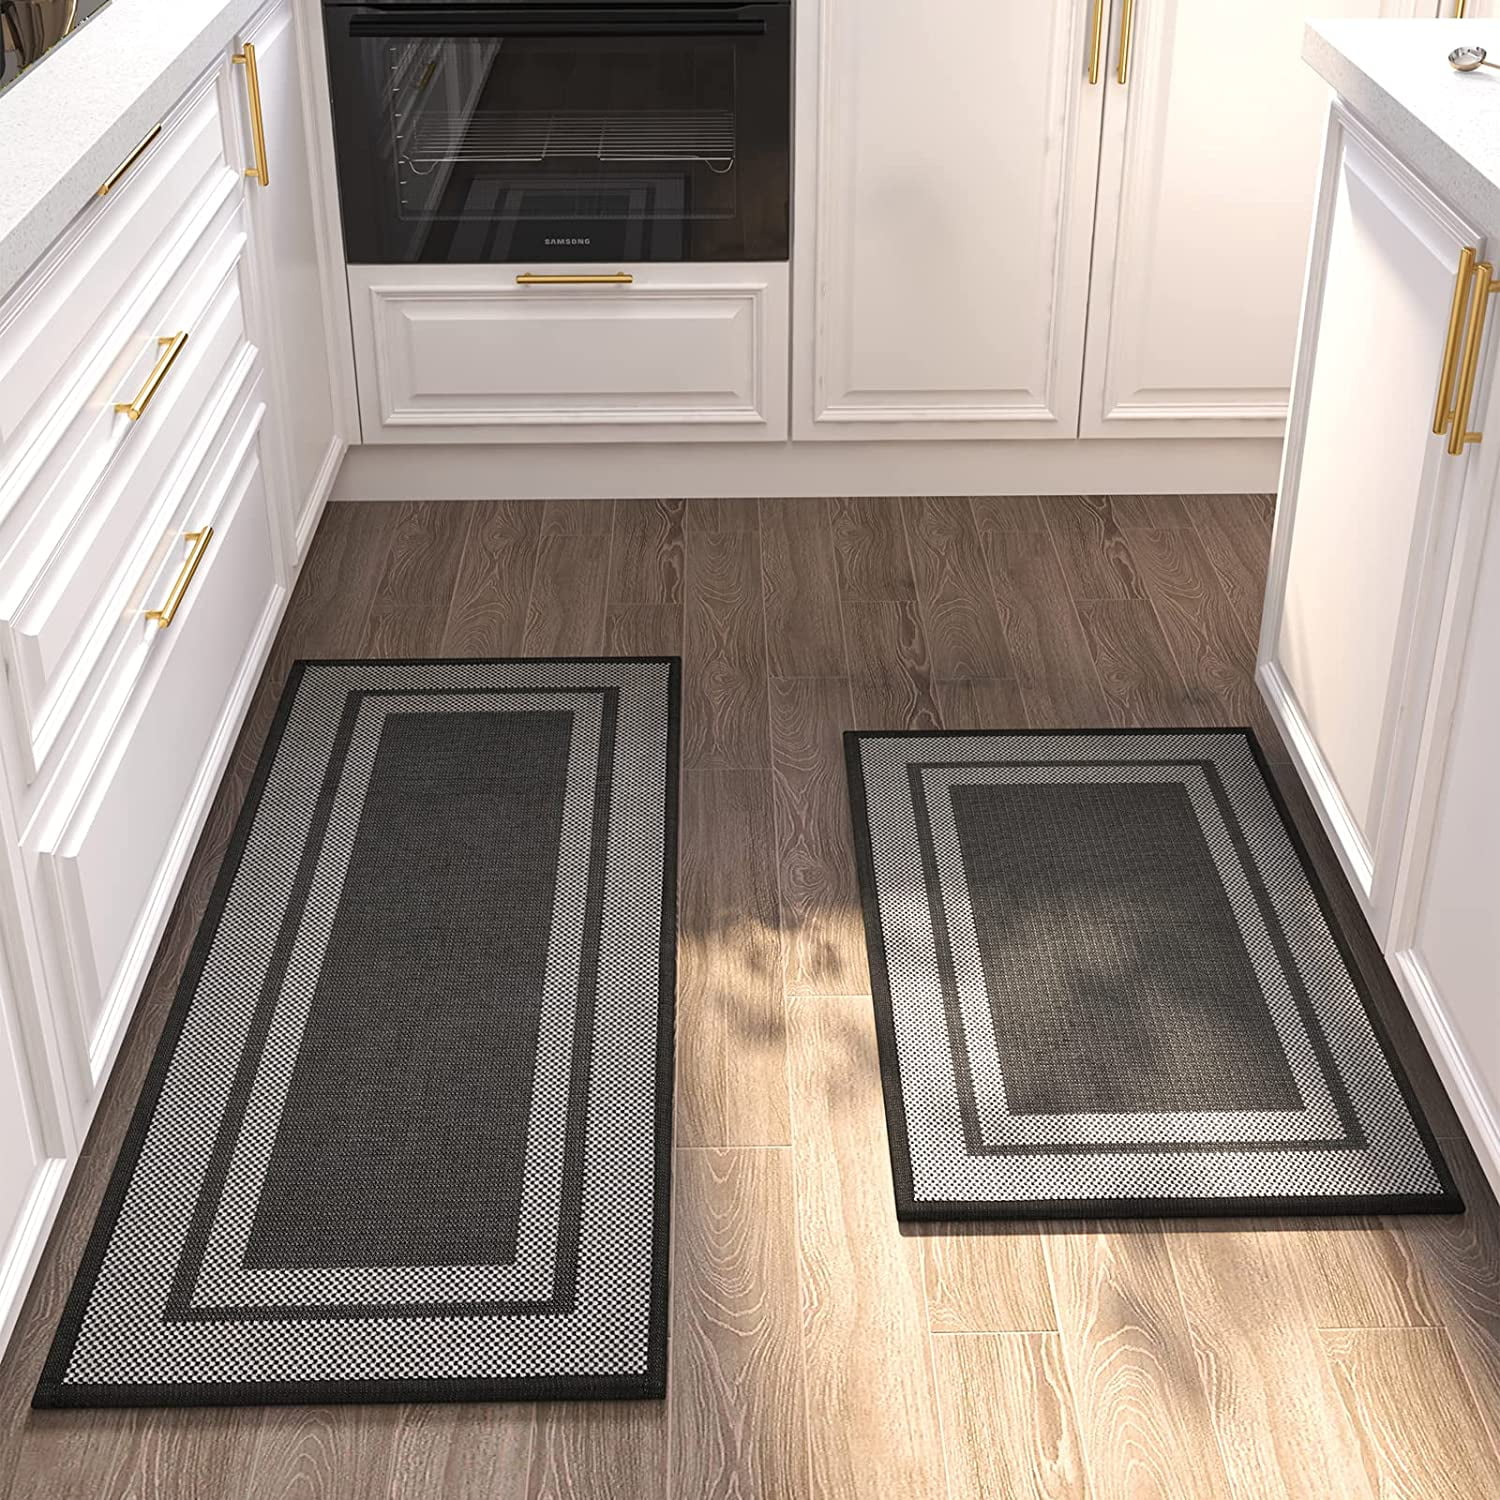 Sixhome Kitchen Rugs Mats Set of 2 Washable Absorbent Rugs for Kitchen Floor Non Skid Kitchen Mats in Front of Sink, 20 inchx32 inch+20 inchx48 inch